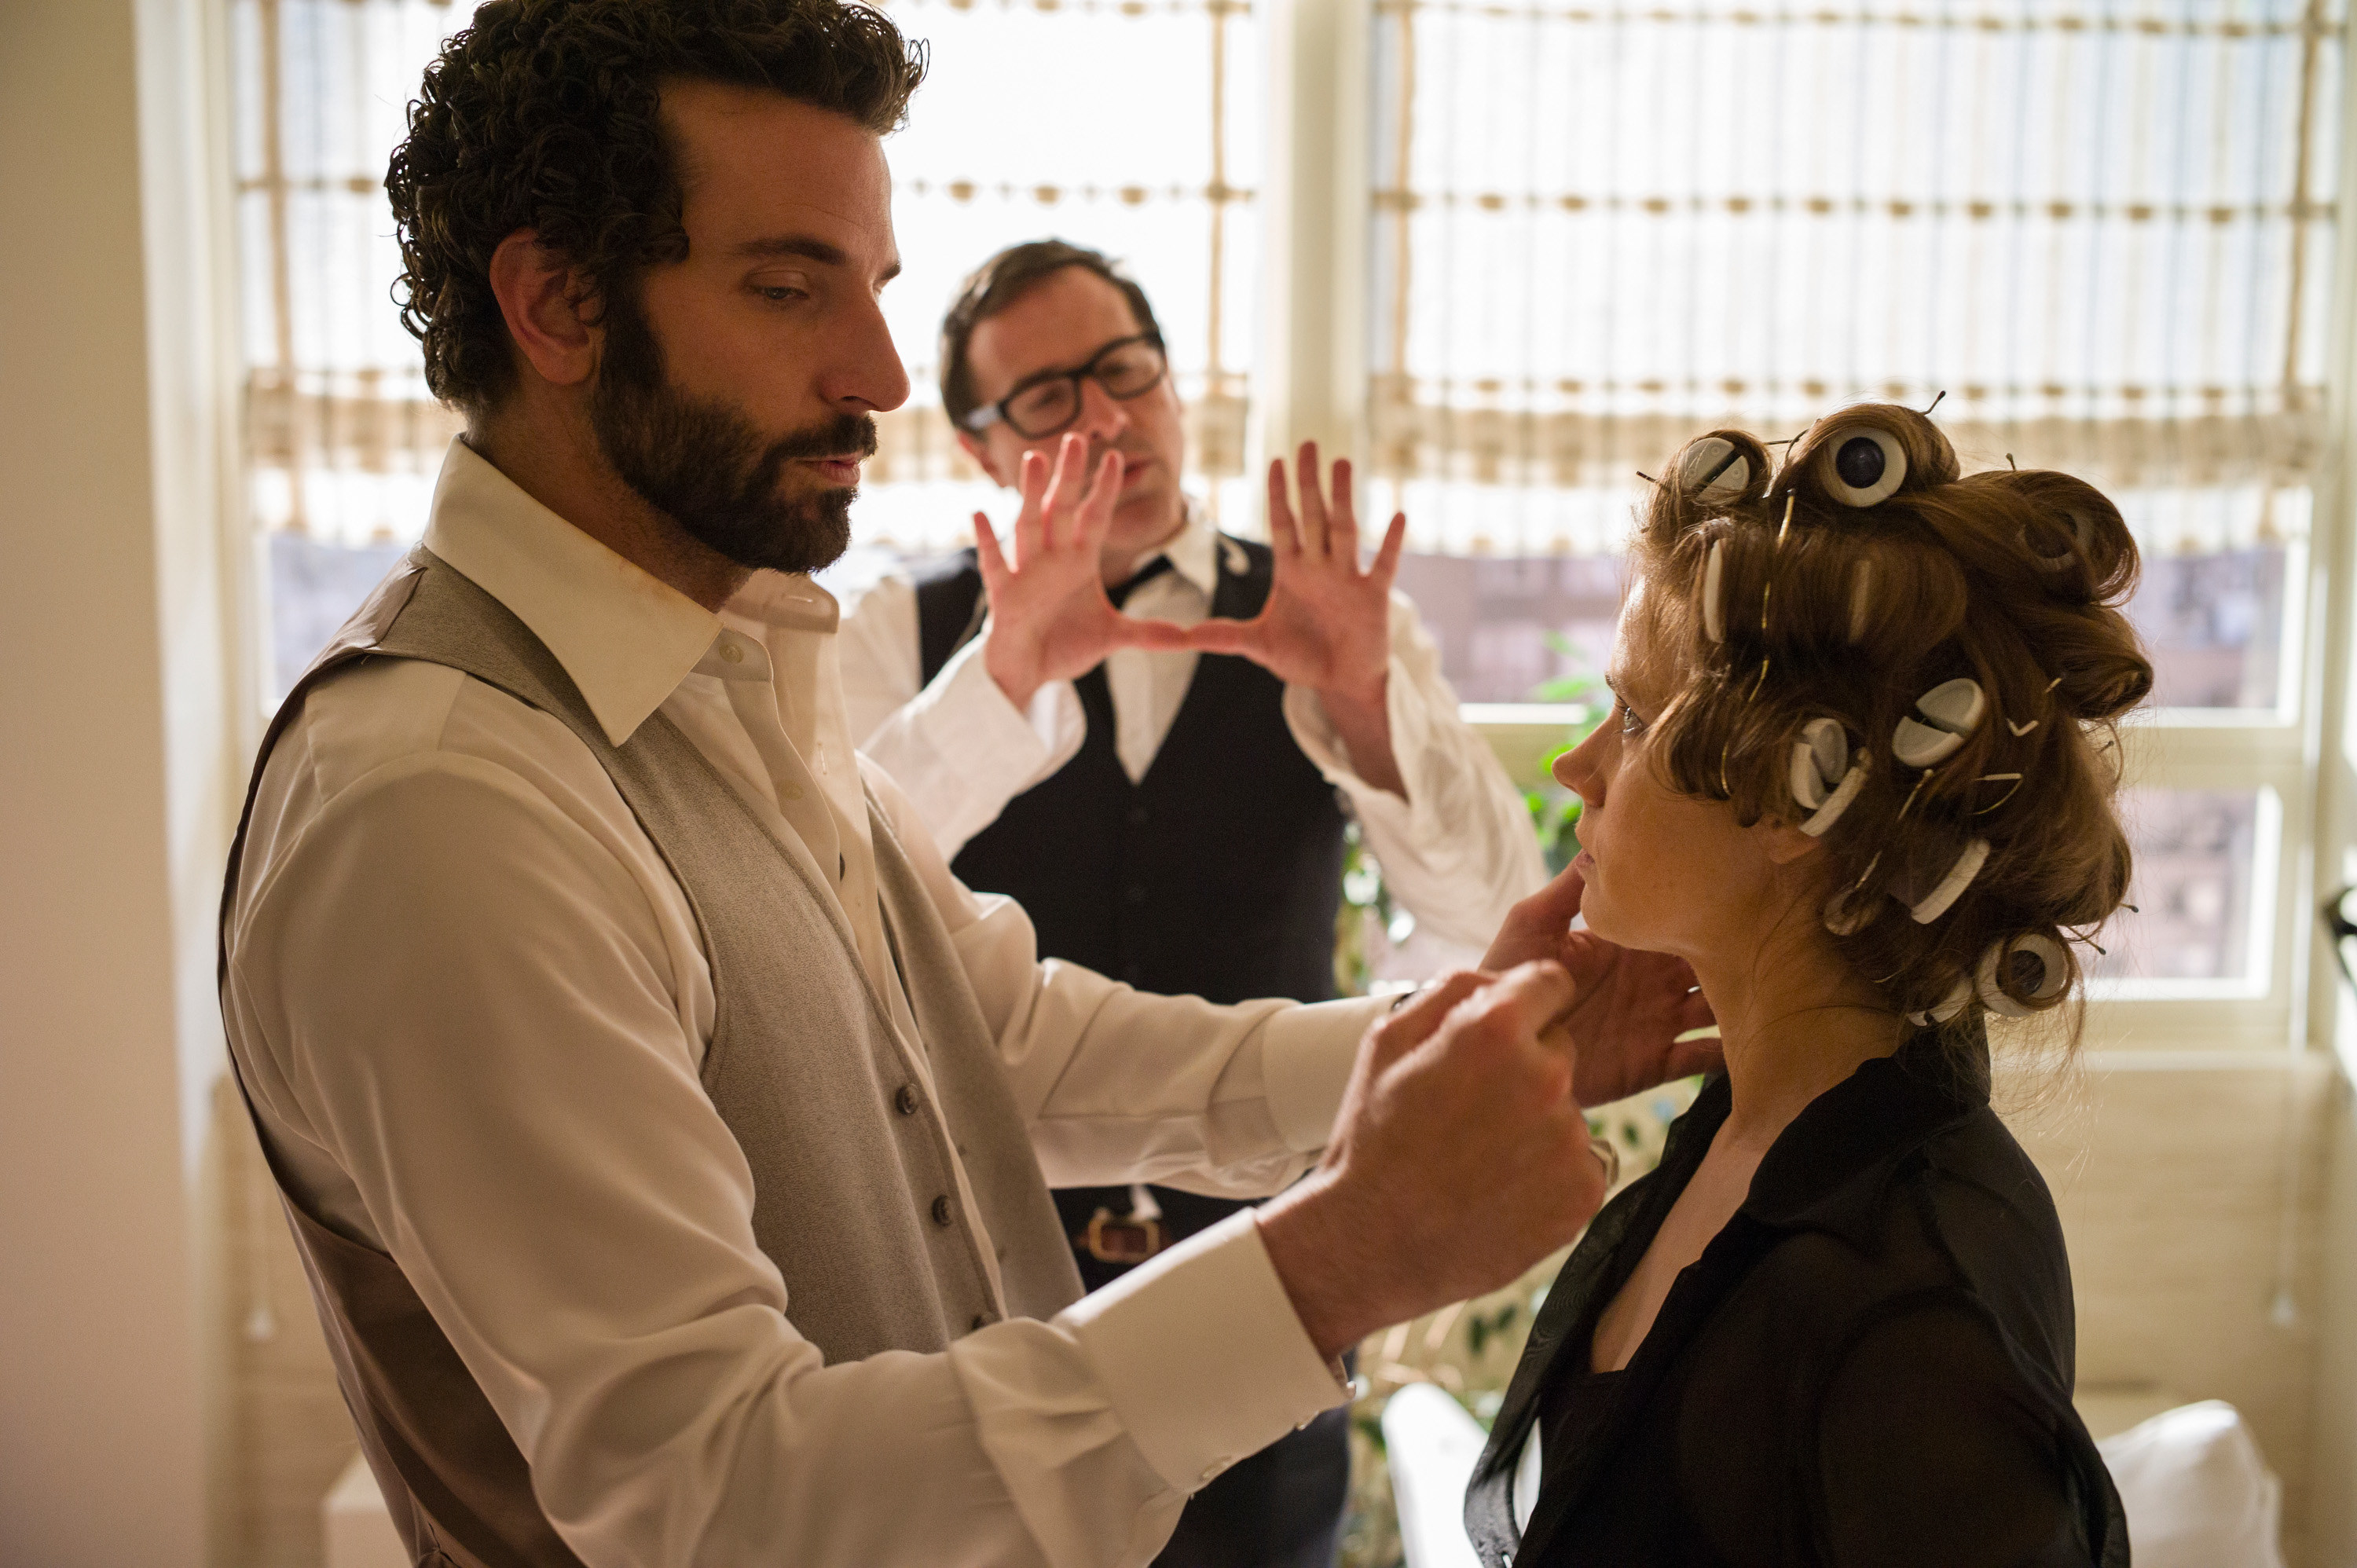 Russell directing Bradley Cooper and Amy Adams during a scene